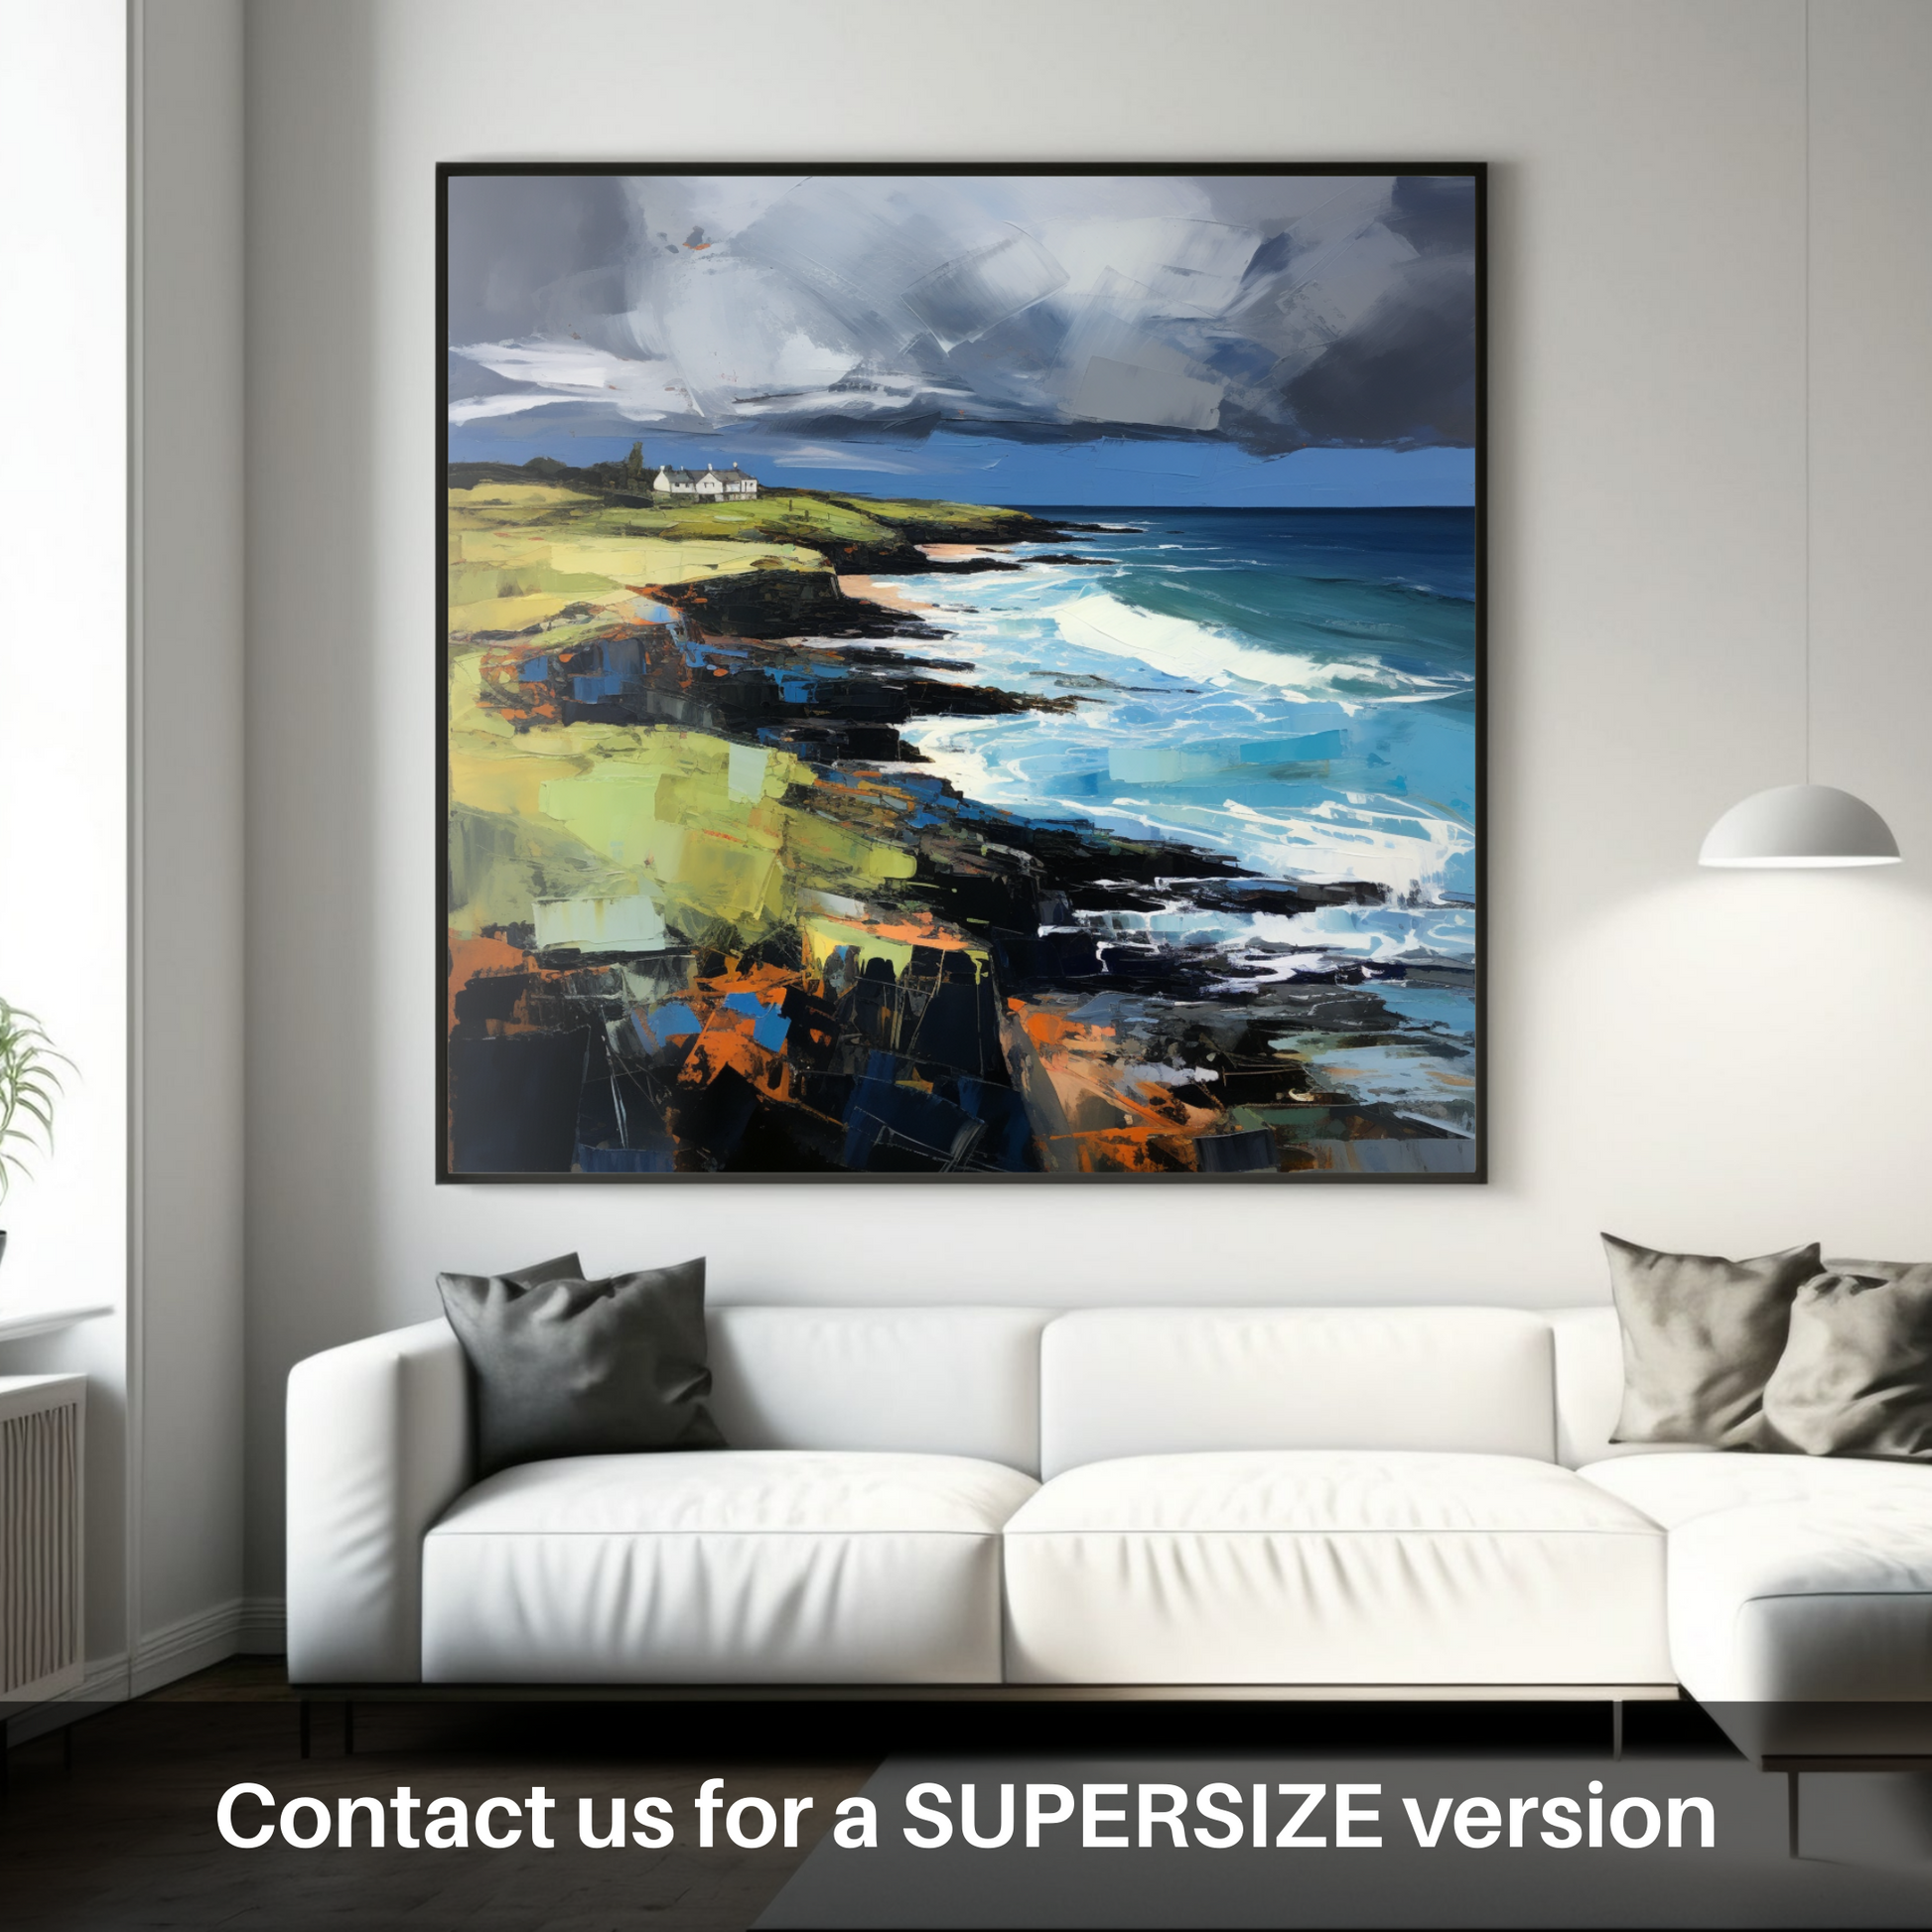 Huge supersize print of Coldingham Bay with a stormy sky